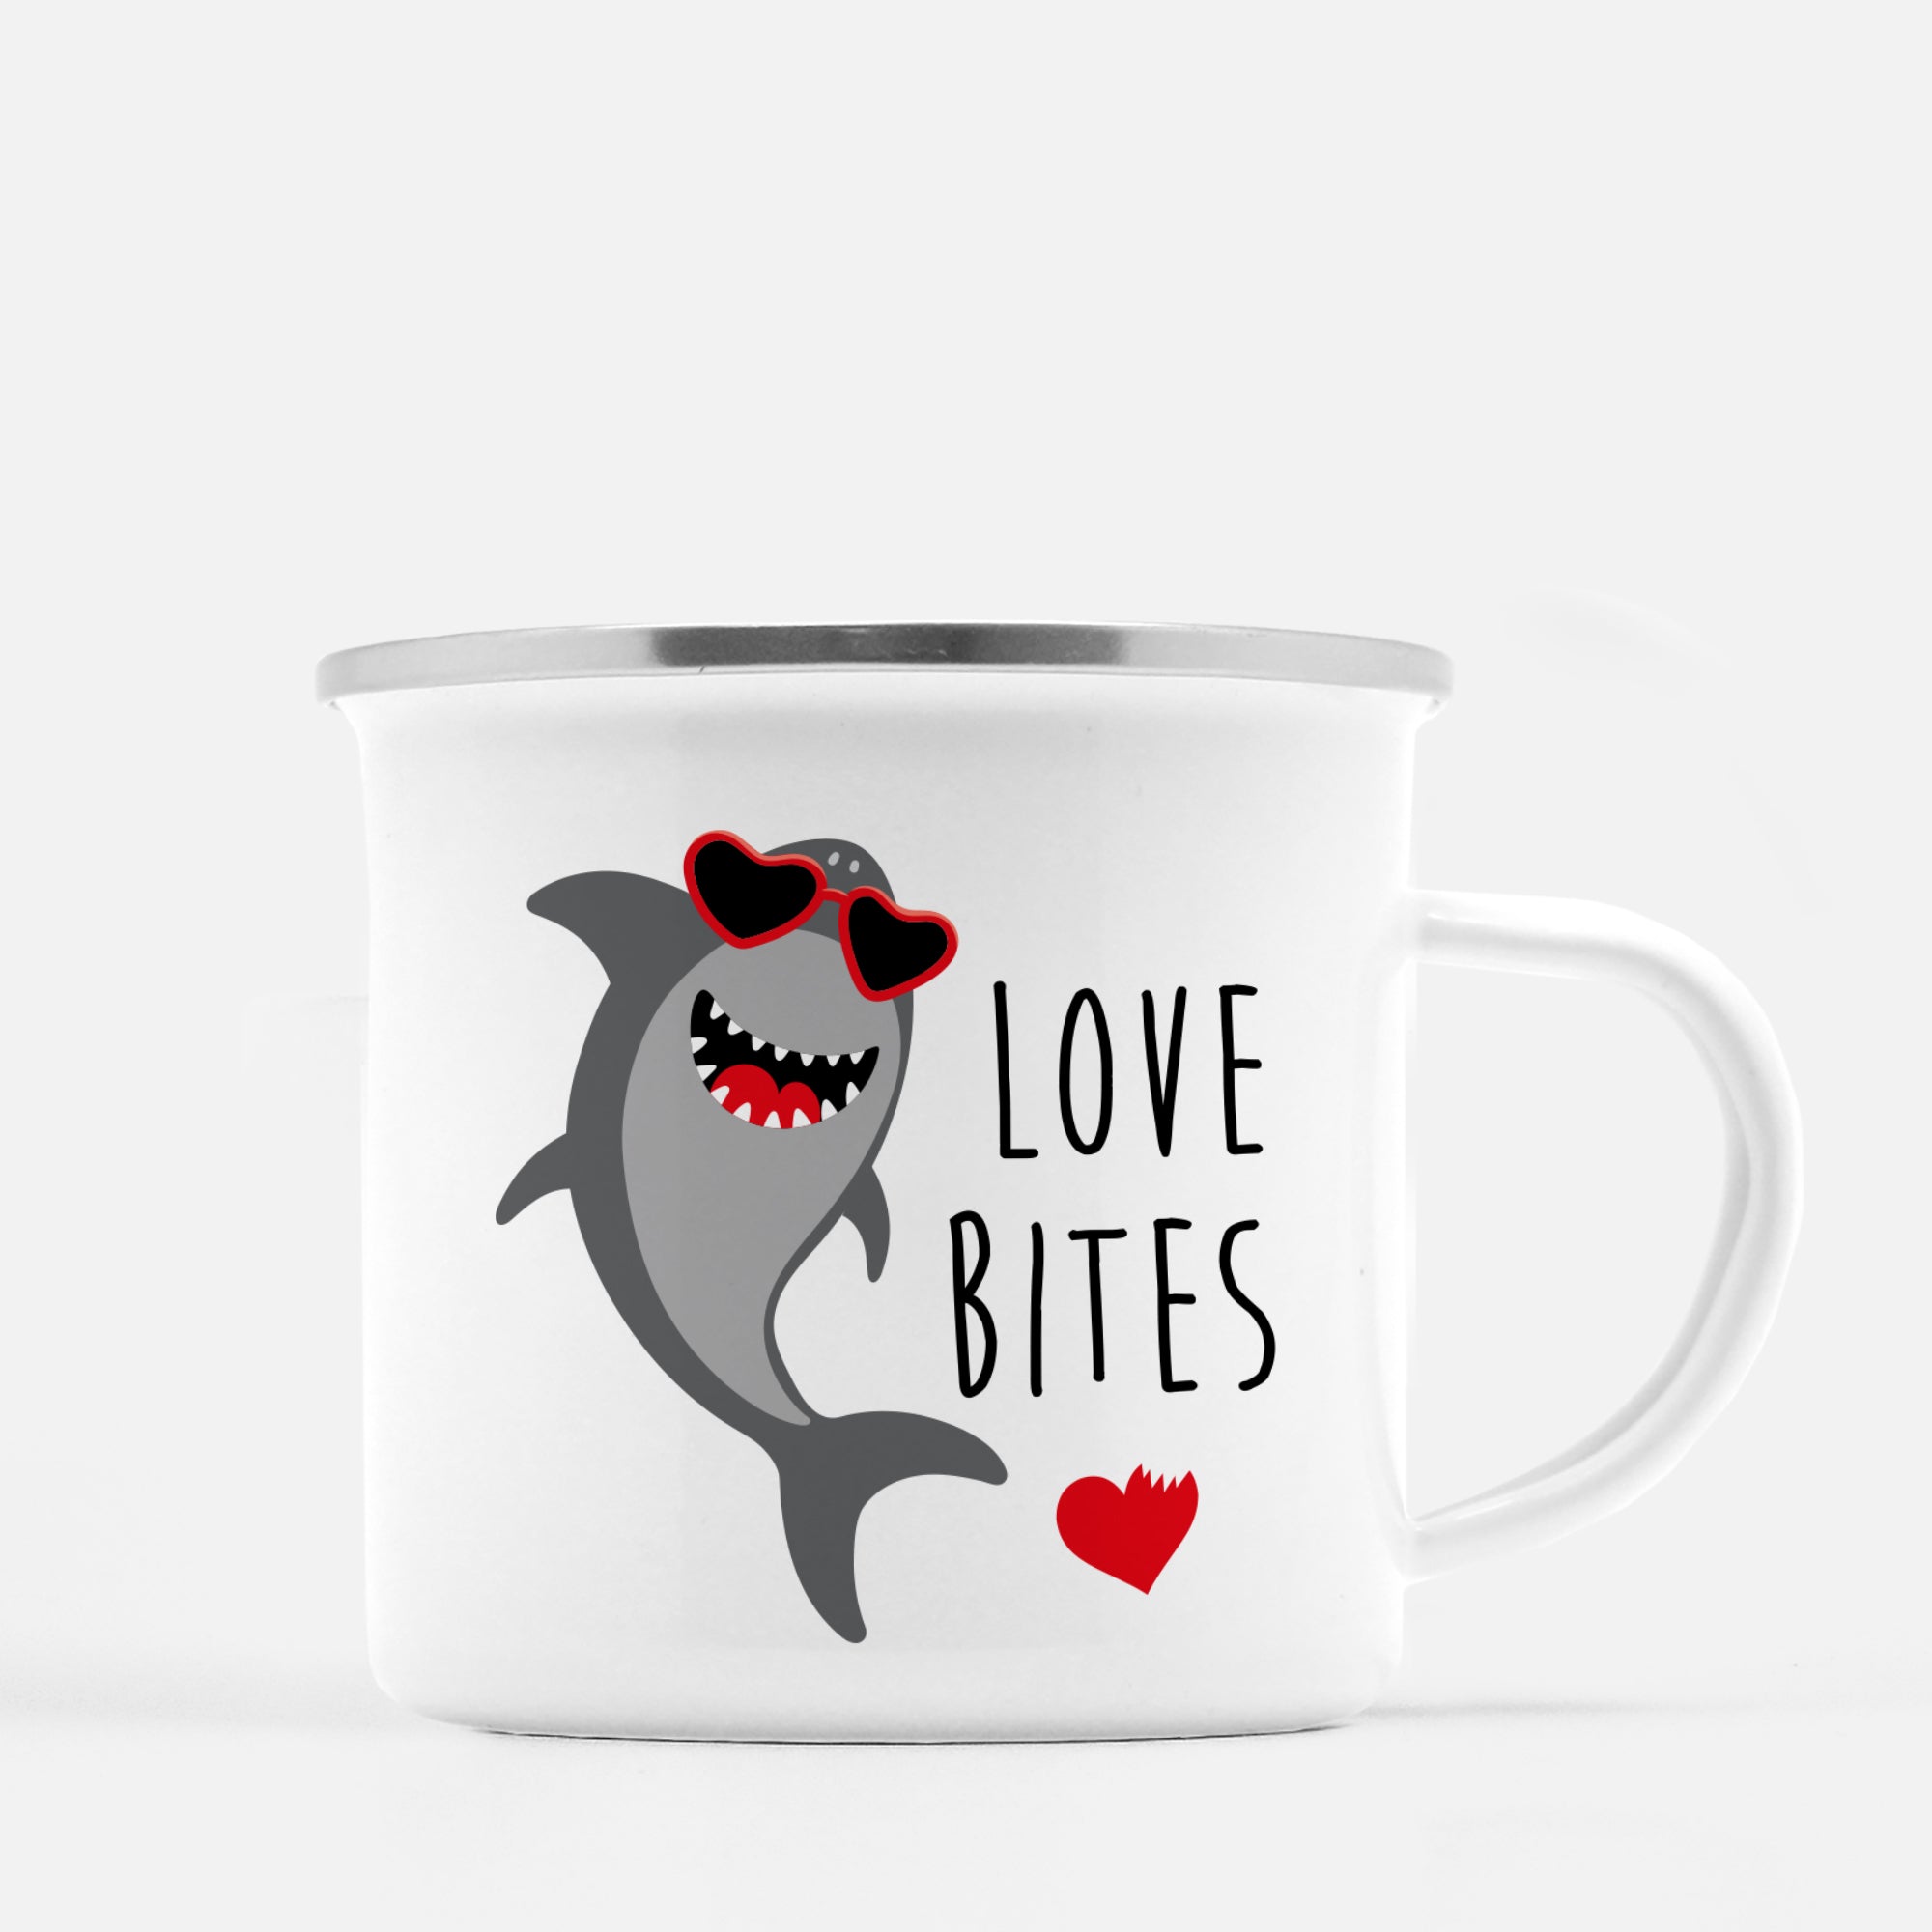 White enamel 12 oz metal camp mug with silver lip | Shark love bites | Valentine's Day gift | Shark wearing heart glasses with a big smile | Pipsy.com